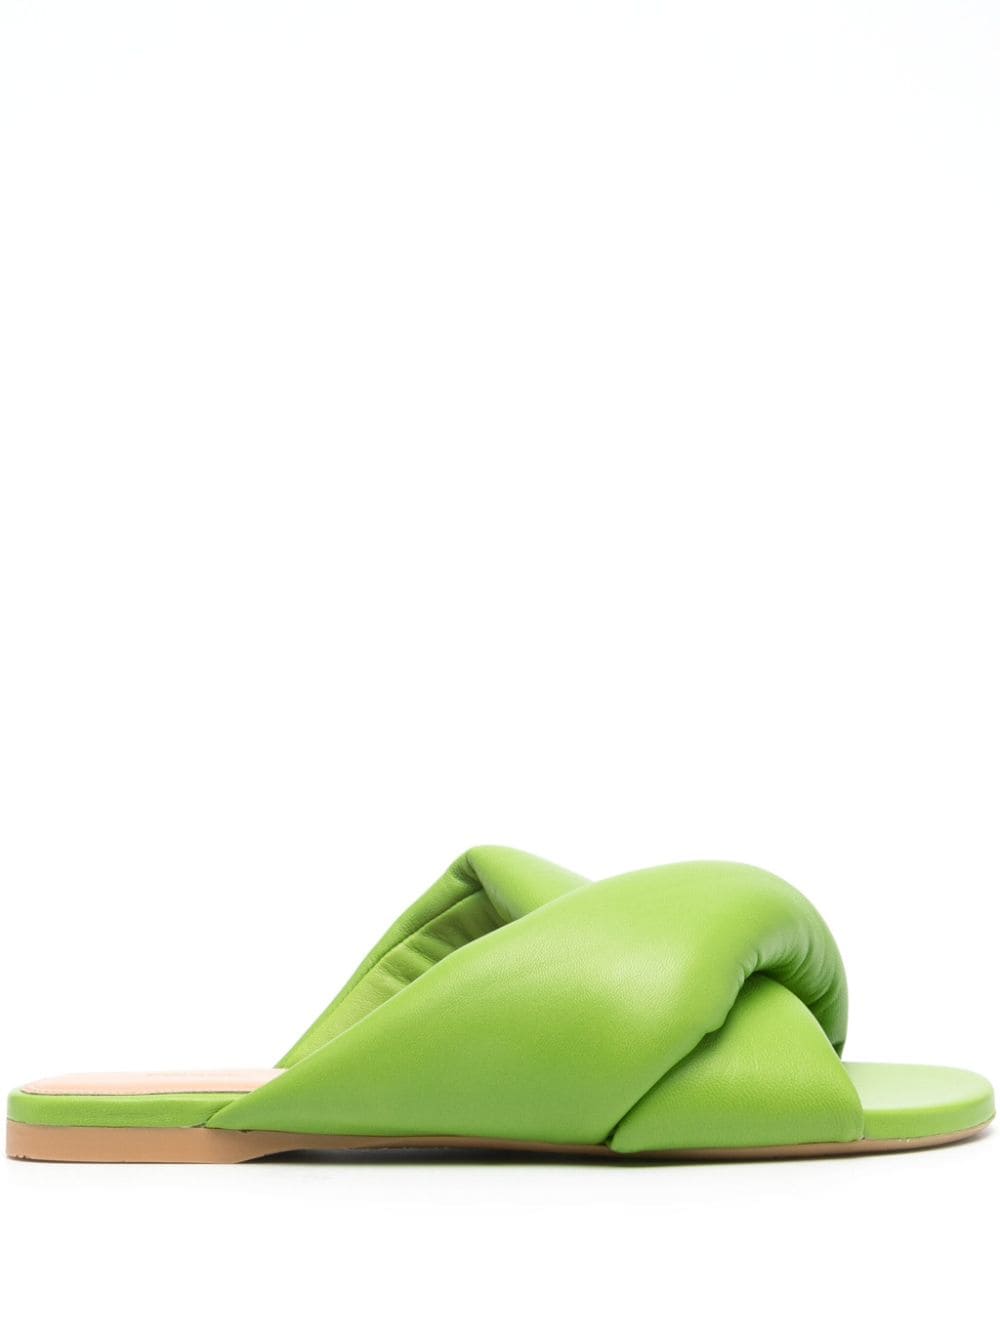 JW Anderson leather flat sandals - Green